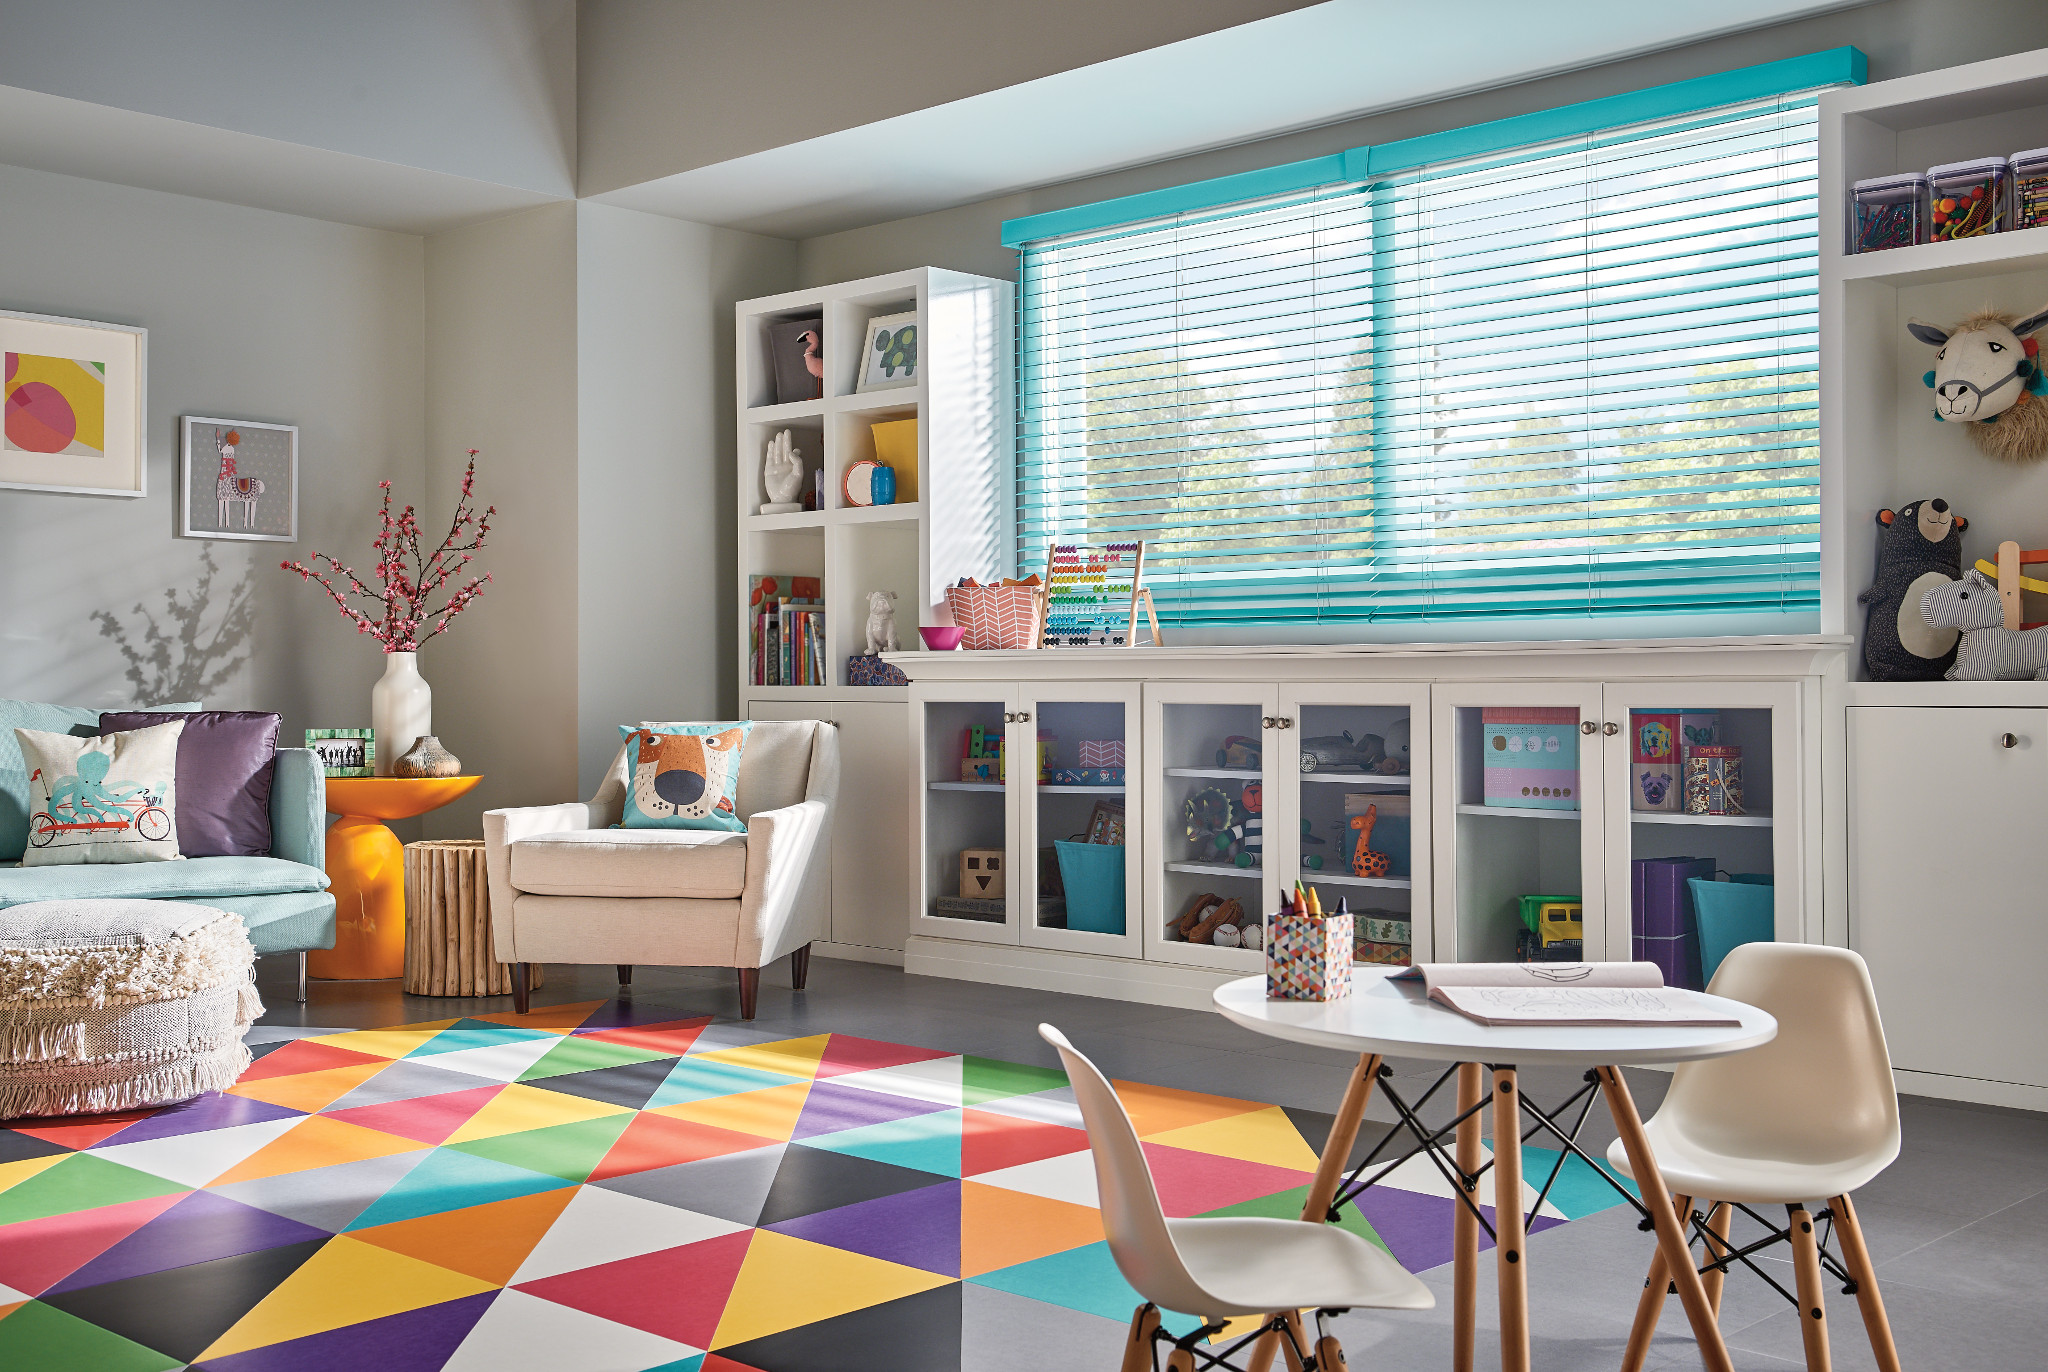 image of children's room with safe window treatments